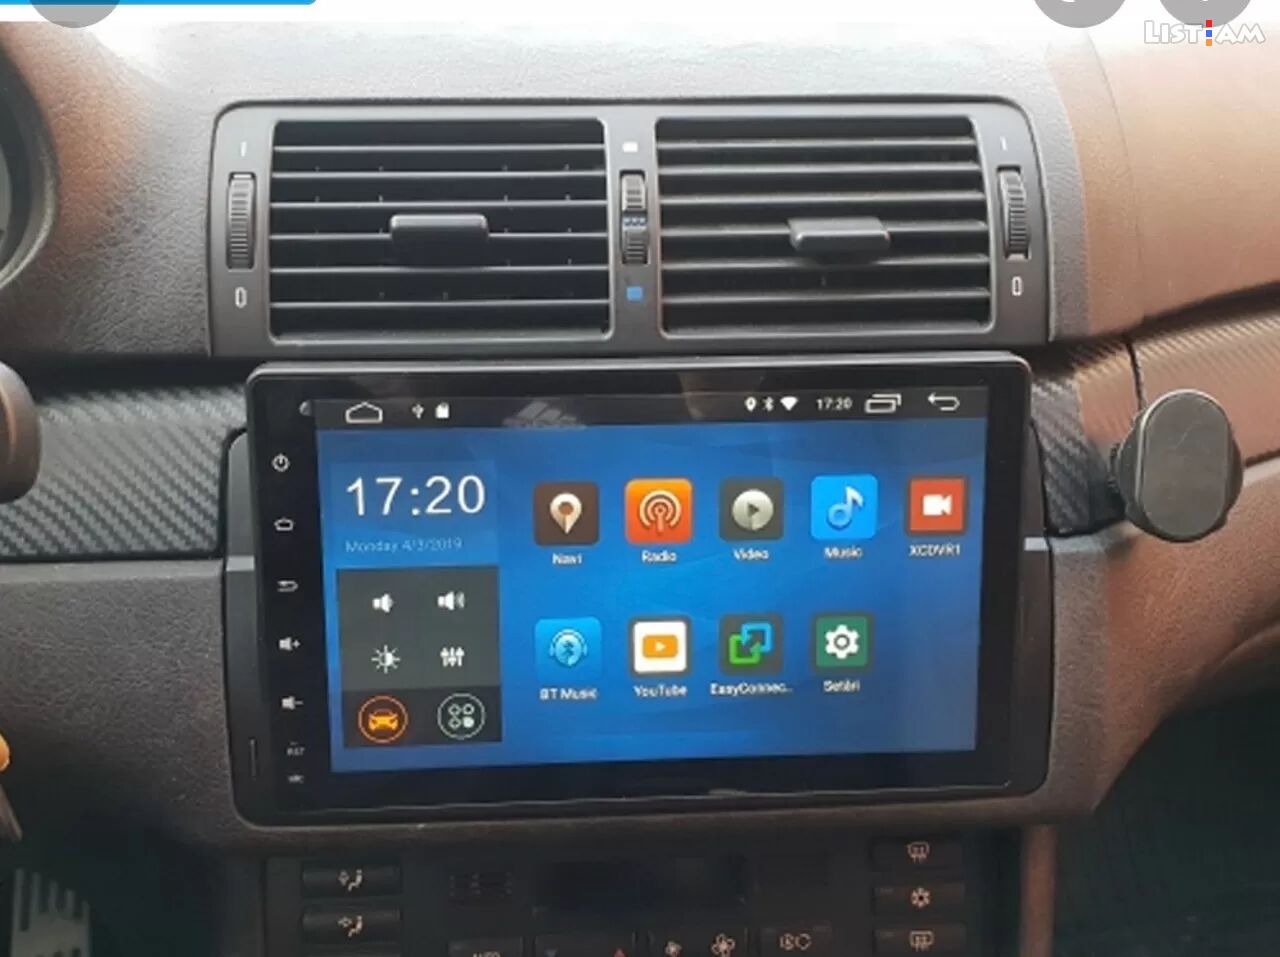 BMW E46 Android 17.1